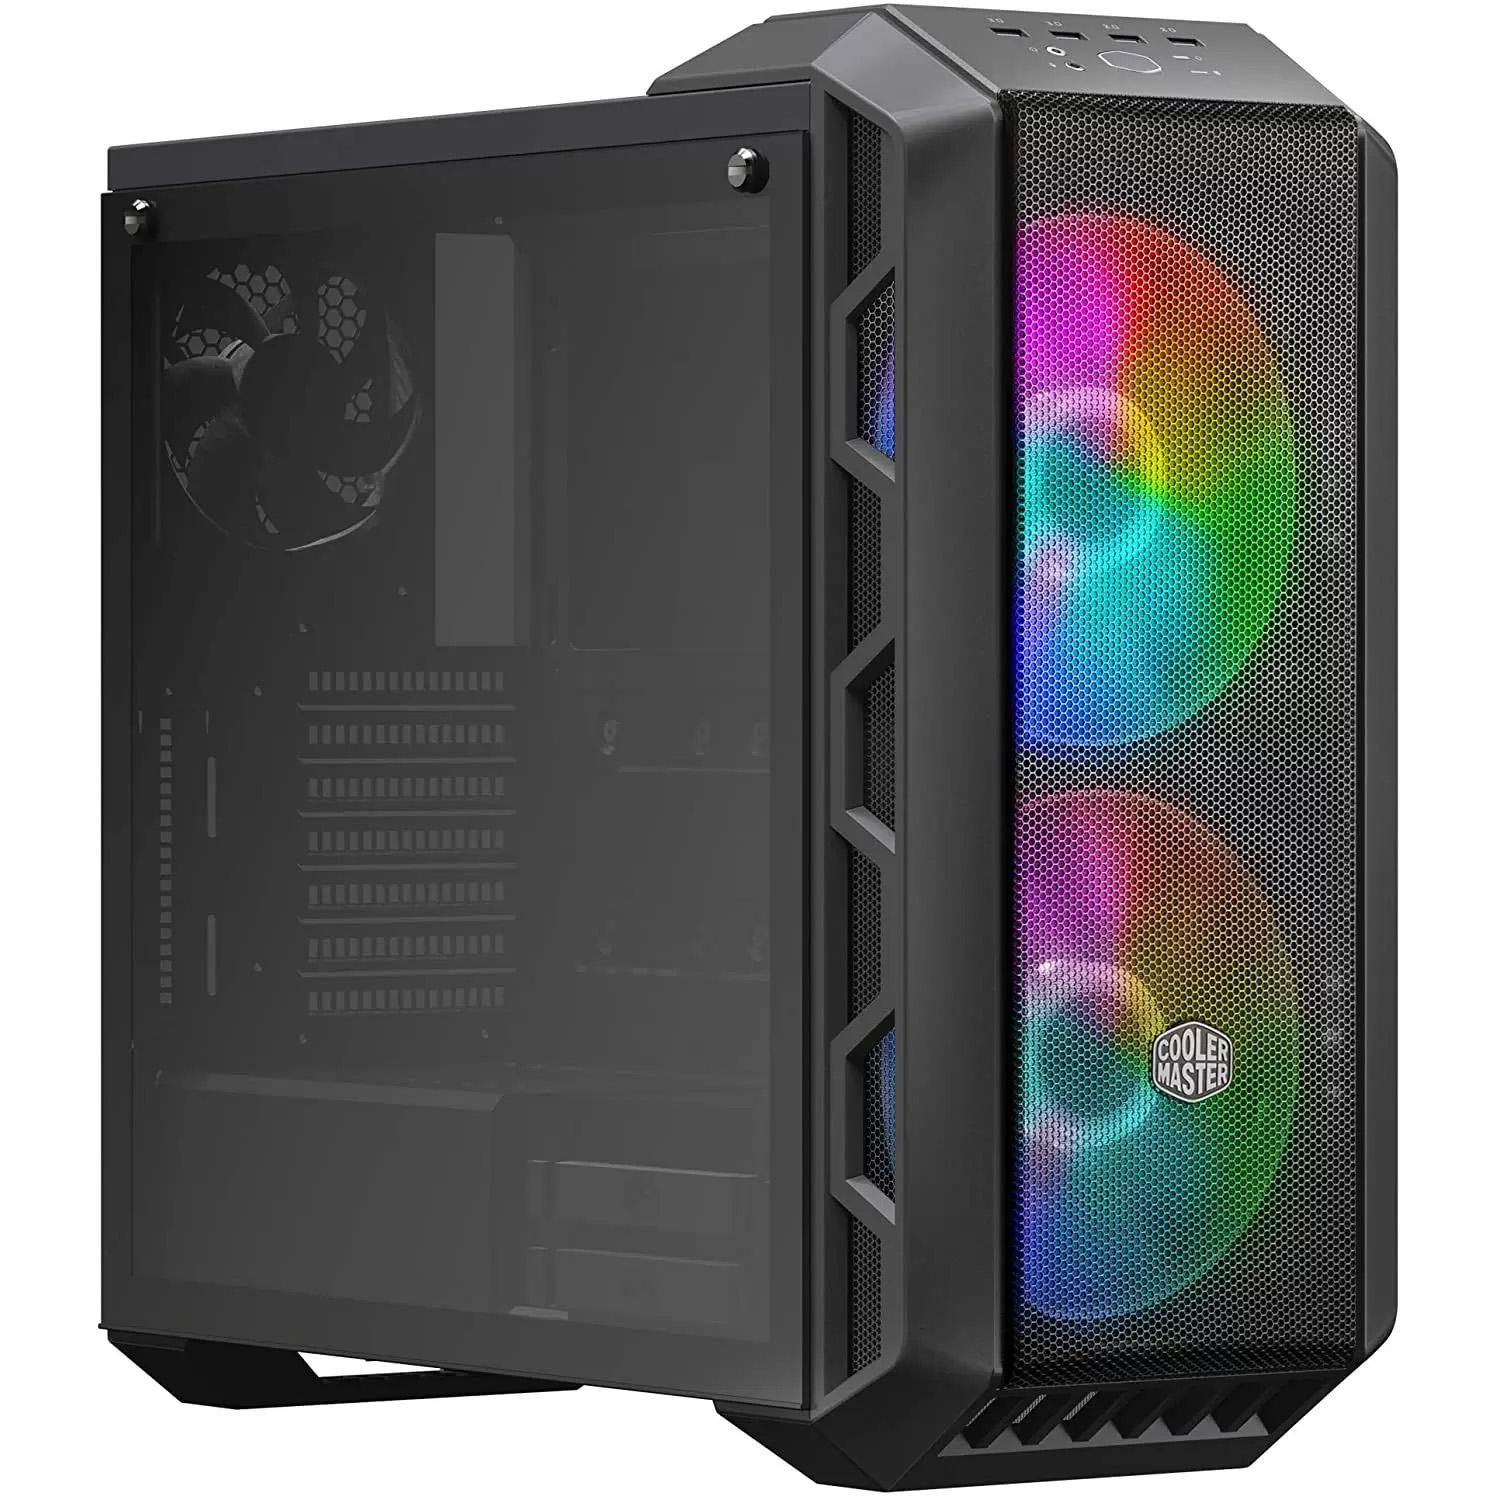 Cooler Master MasterCase H500 ATX Mid-Tower Case for $99.99 Shipped